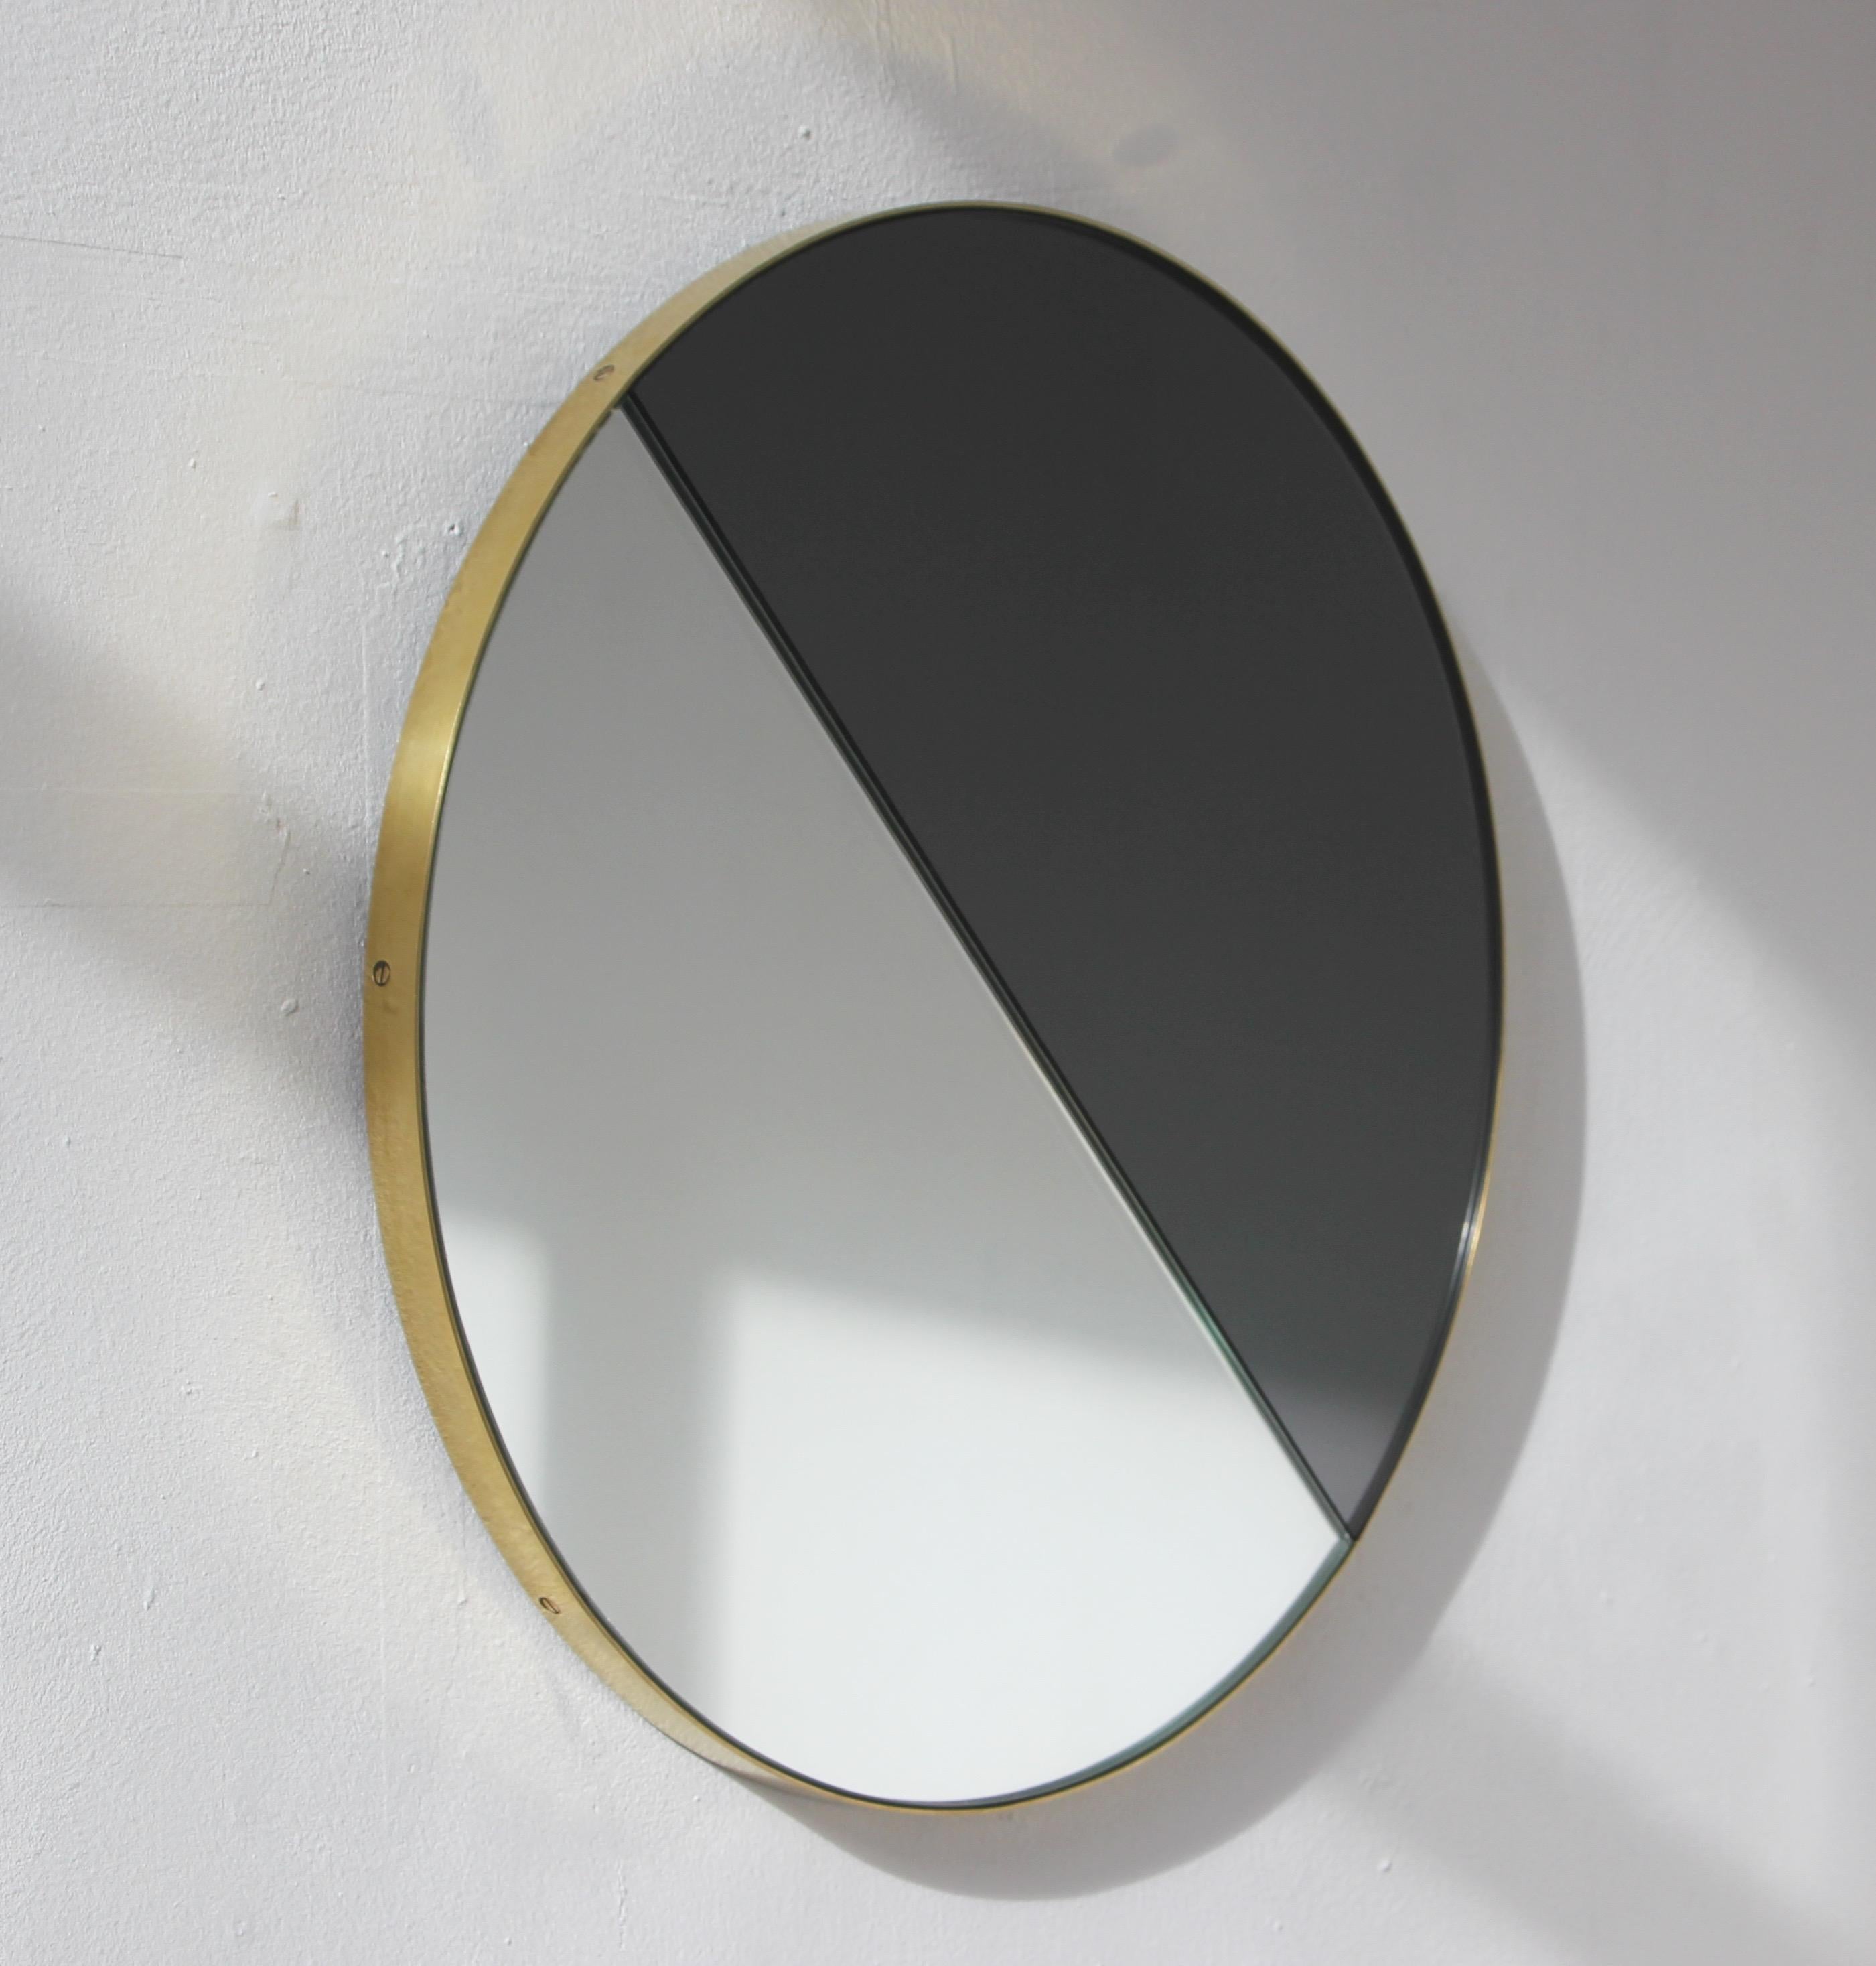 British Orbis Dualis Mixed Tint Contemporary Circular Mirror with Brass Frame, Small For Sale